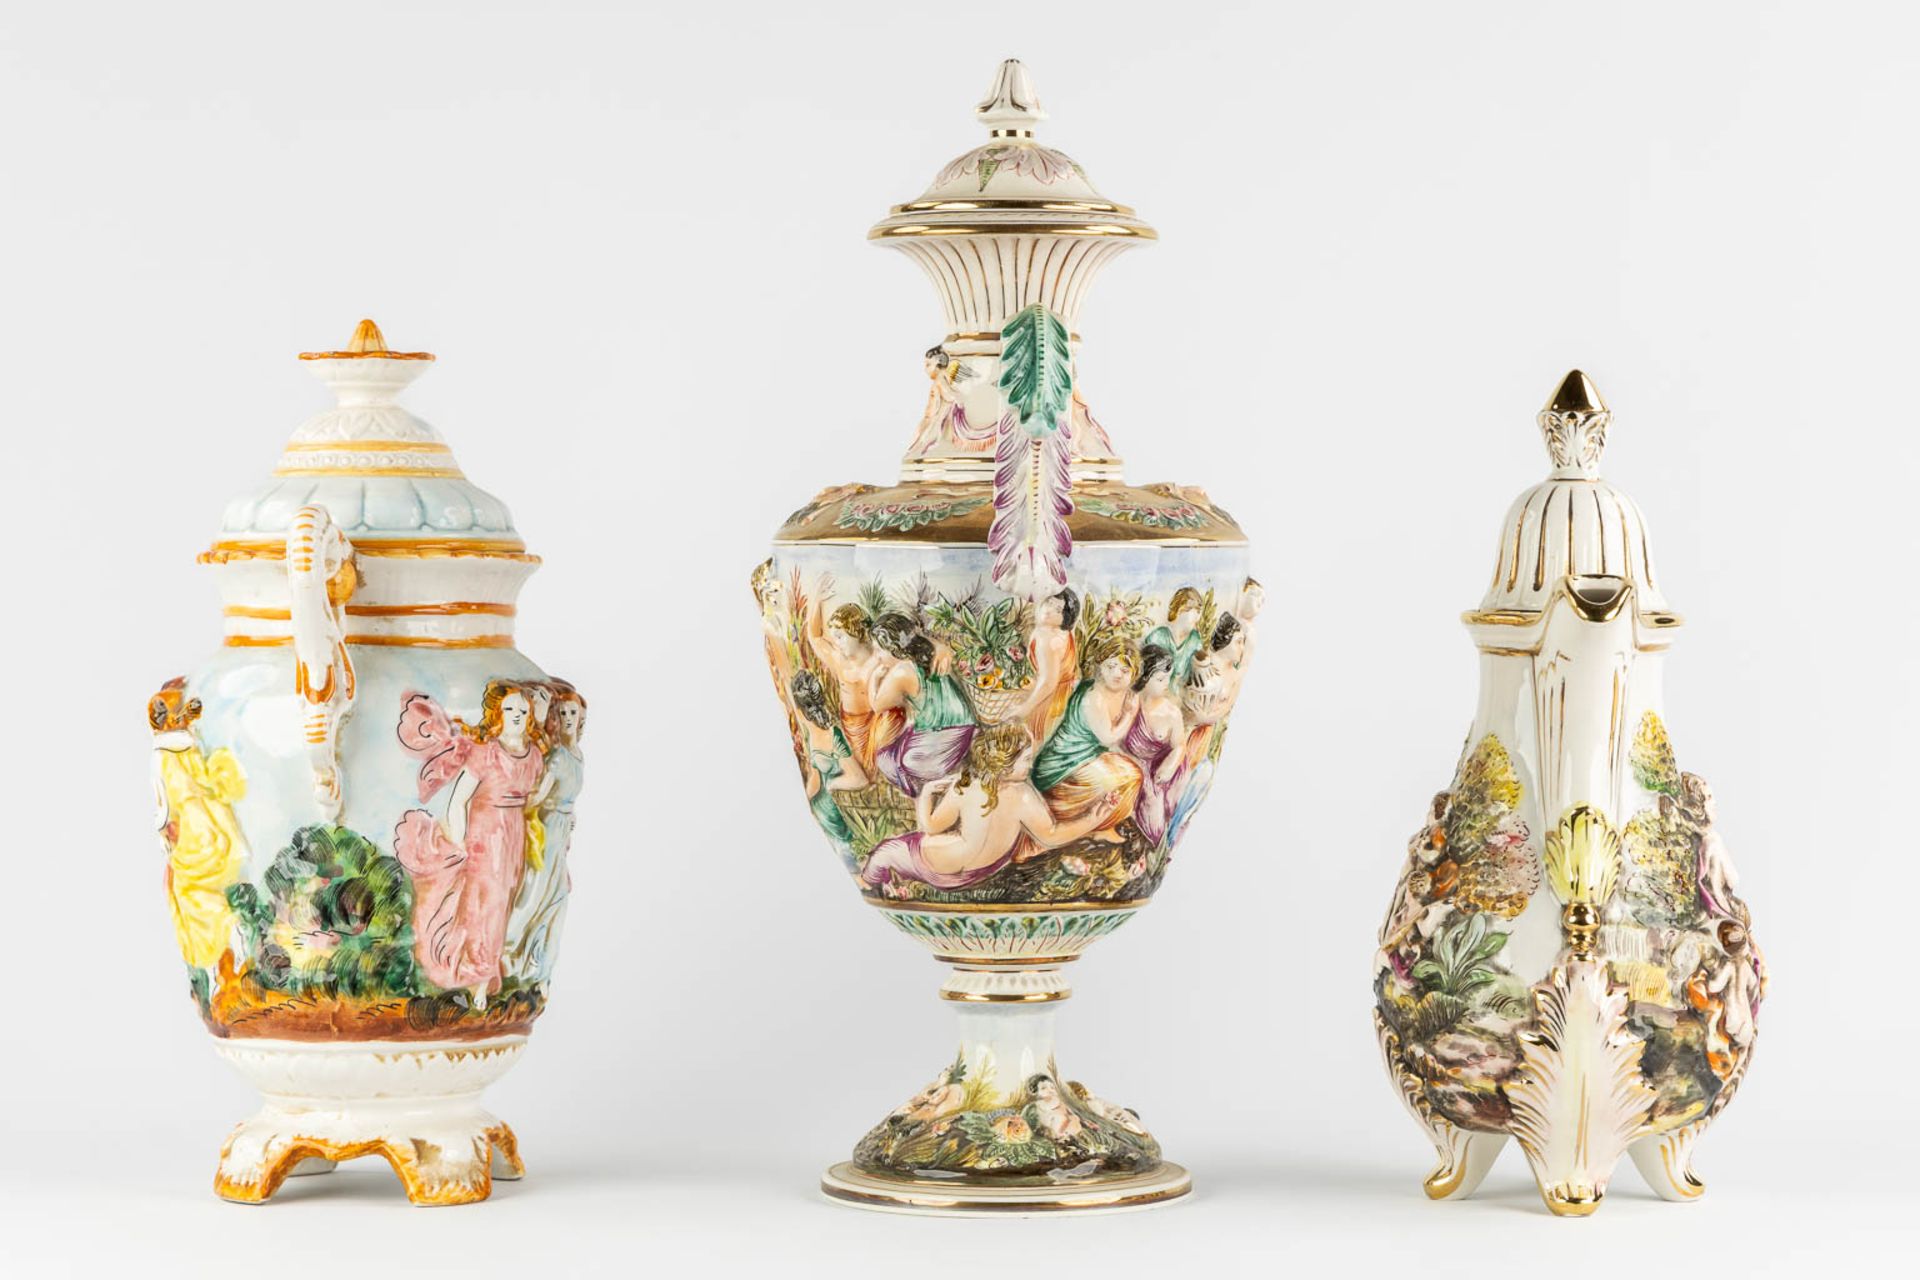 Capodimonte, 5 large pitchers, vases and urns. Glazed faience. (L:23 x W:31 x H:50 cm) - Image 6 of 31